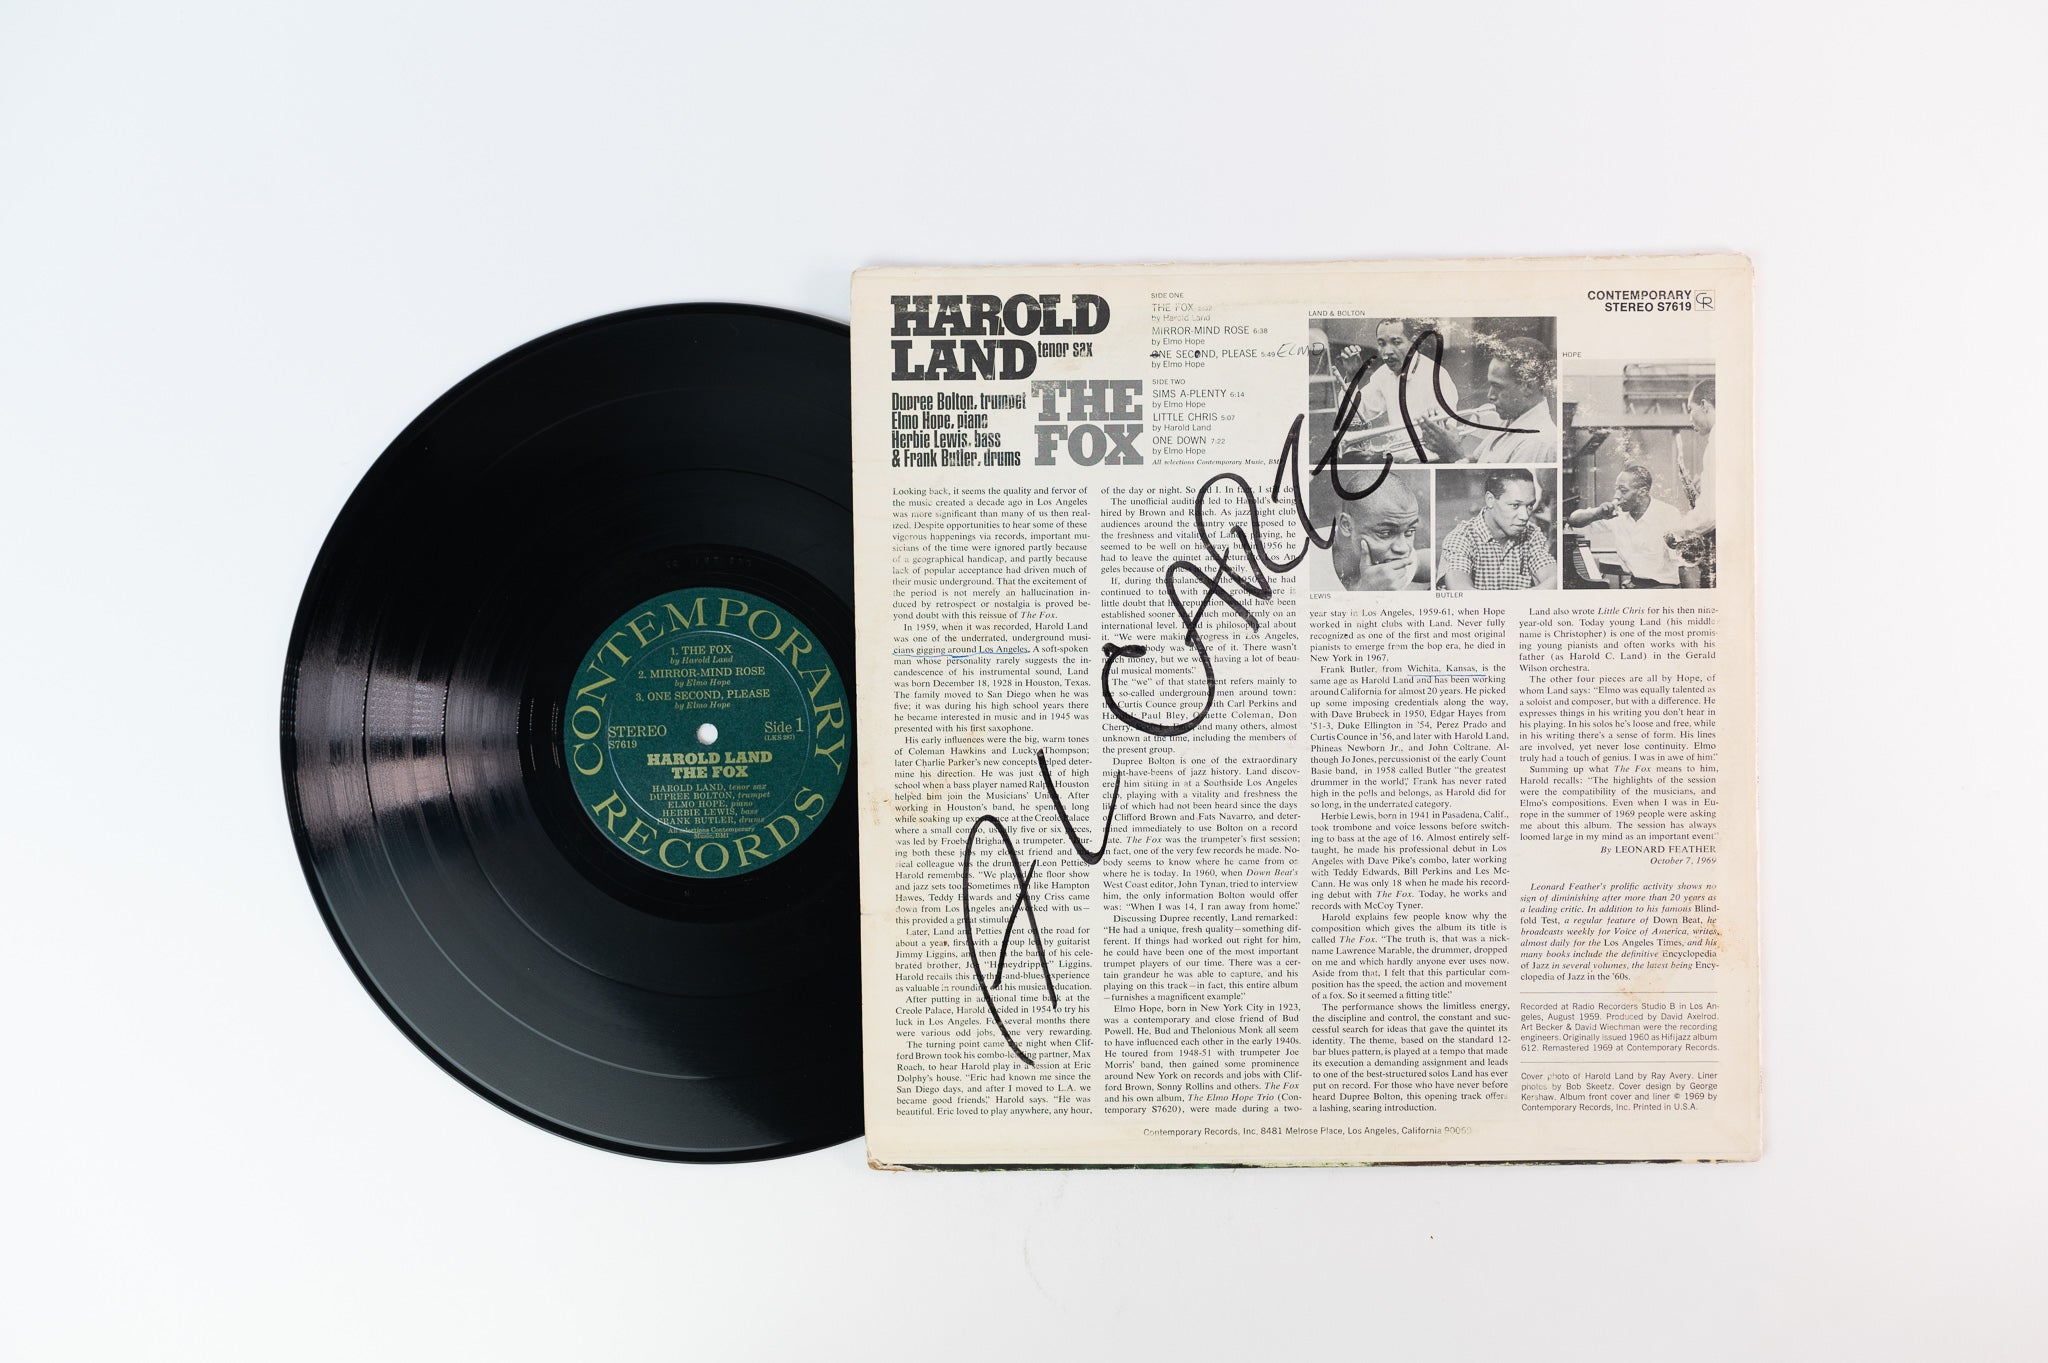 Harold Land - The Fox on Contemporary Stereo Deep Groove